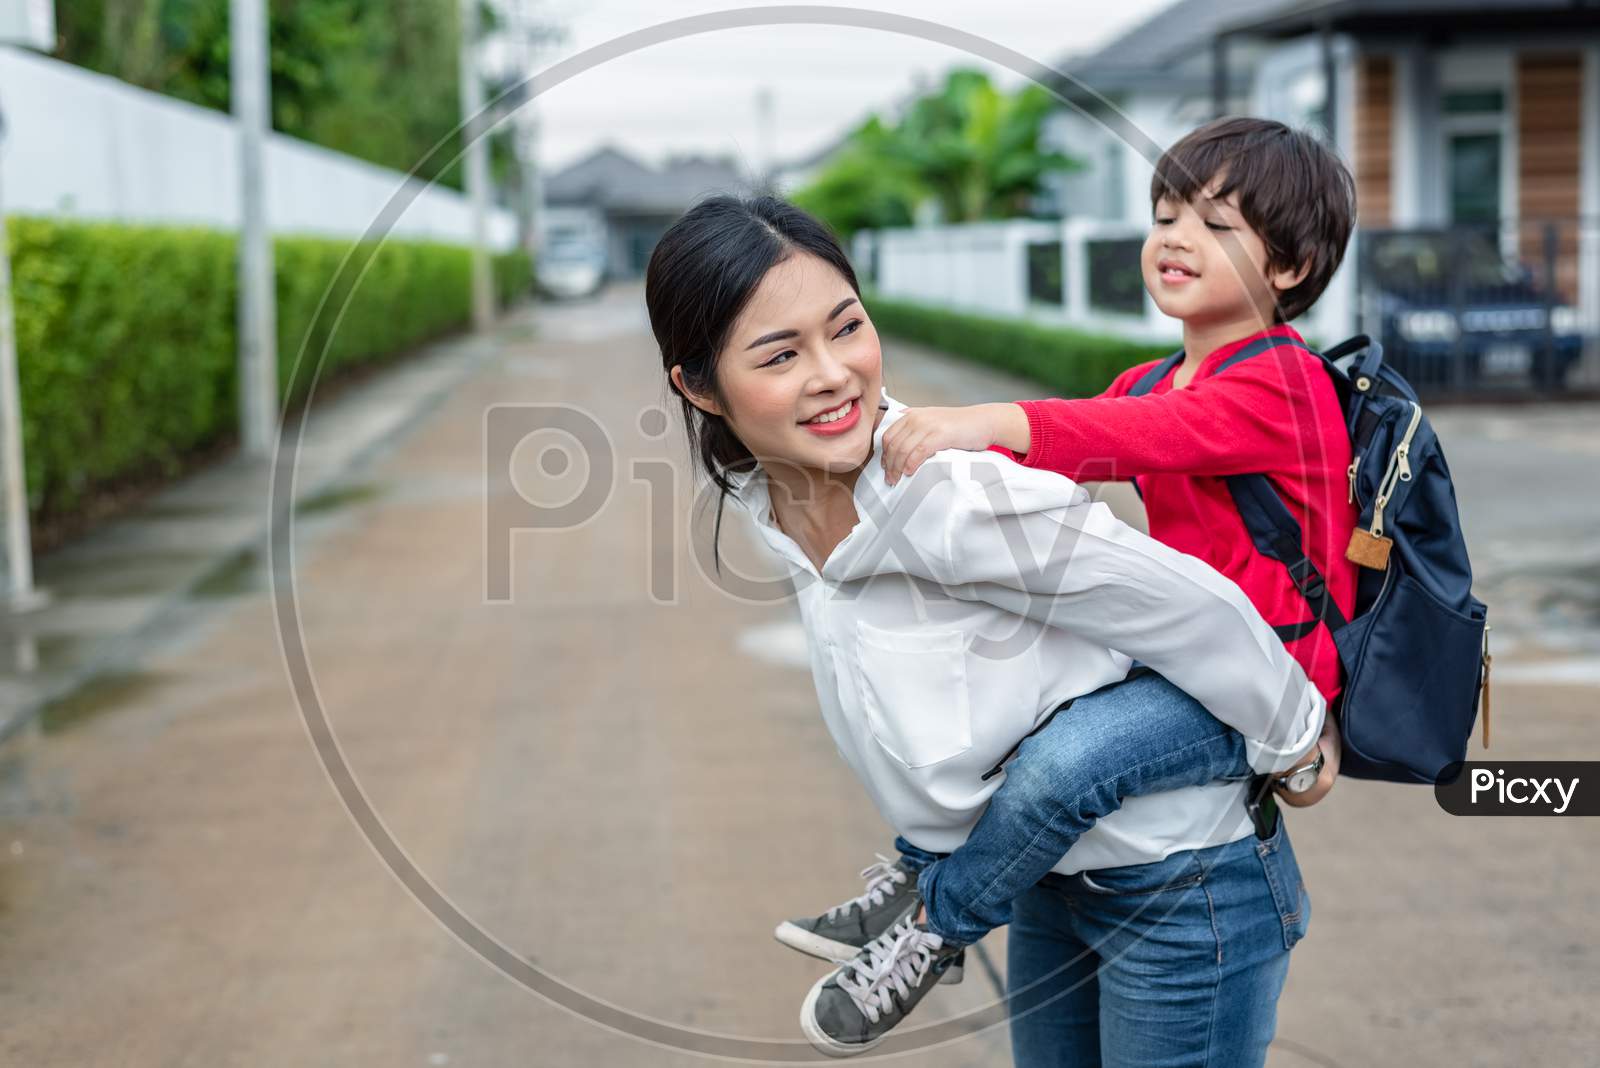 Single Mom Carrying And Playing With Her Children Near Home With Villa Street Background. People And Lifestyles Concept. Happy Family And Home Sweet Home Theme. Outdoors And Nature Theme.